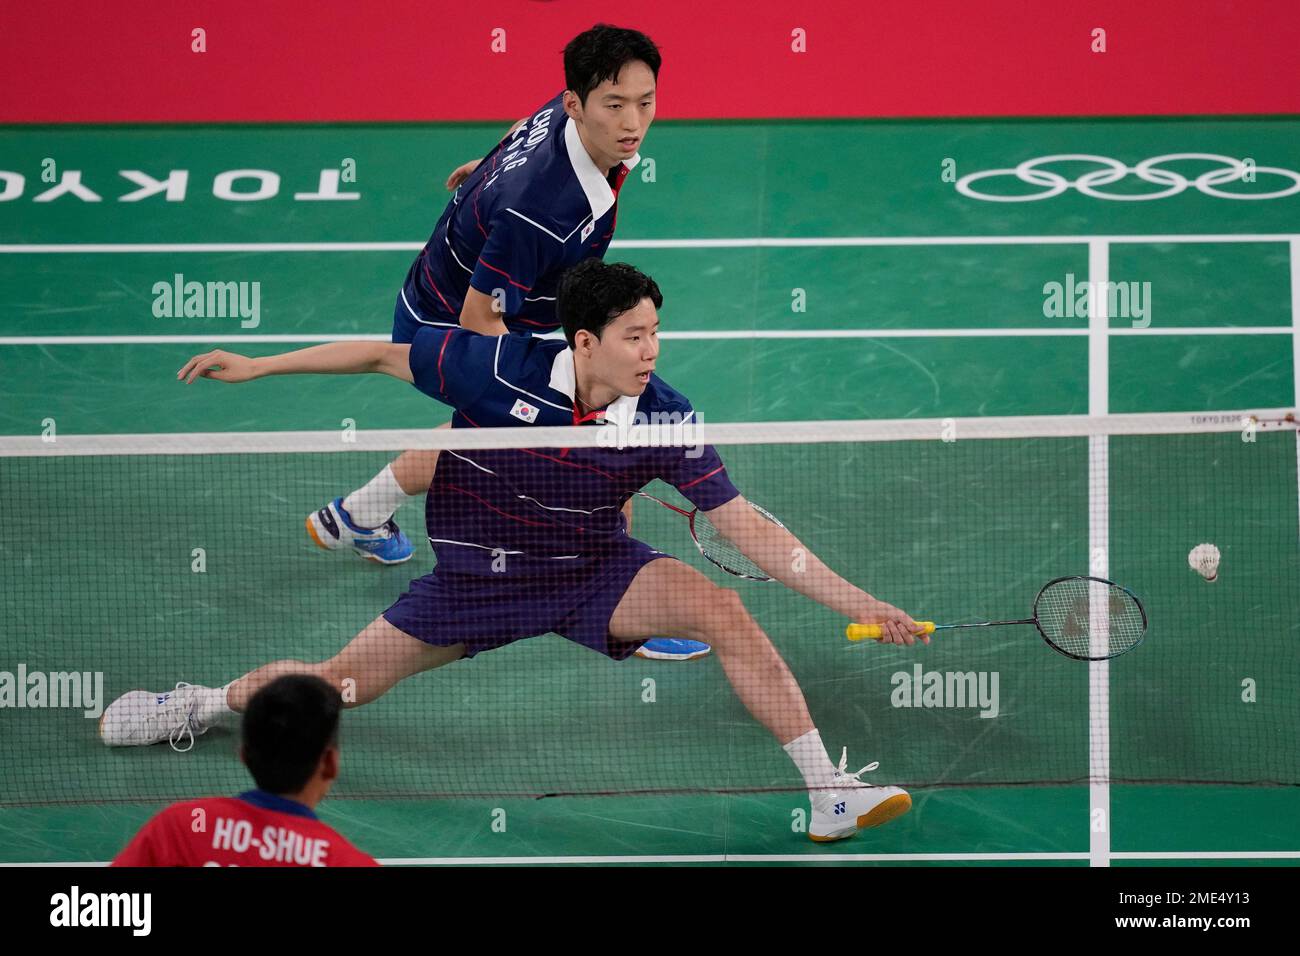 South Korea's Choi Sol-gyu, top, and Seo Seung-jae play against Canada's  Jason Ho-Shue and Nyl Yakura during their men's doubles badminton match at  the 2020 Summer Olympics, Sunday, July 25, 2021, in